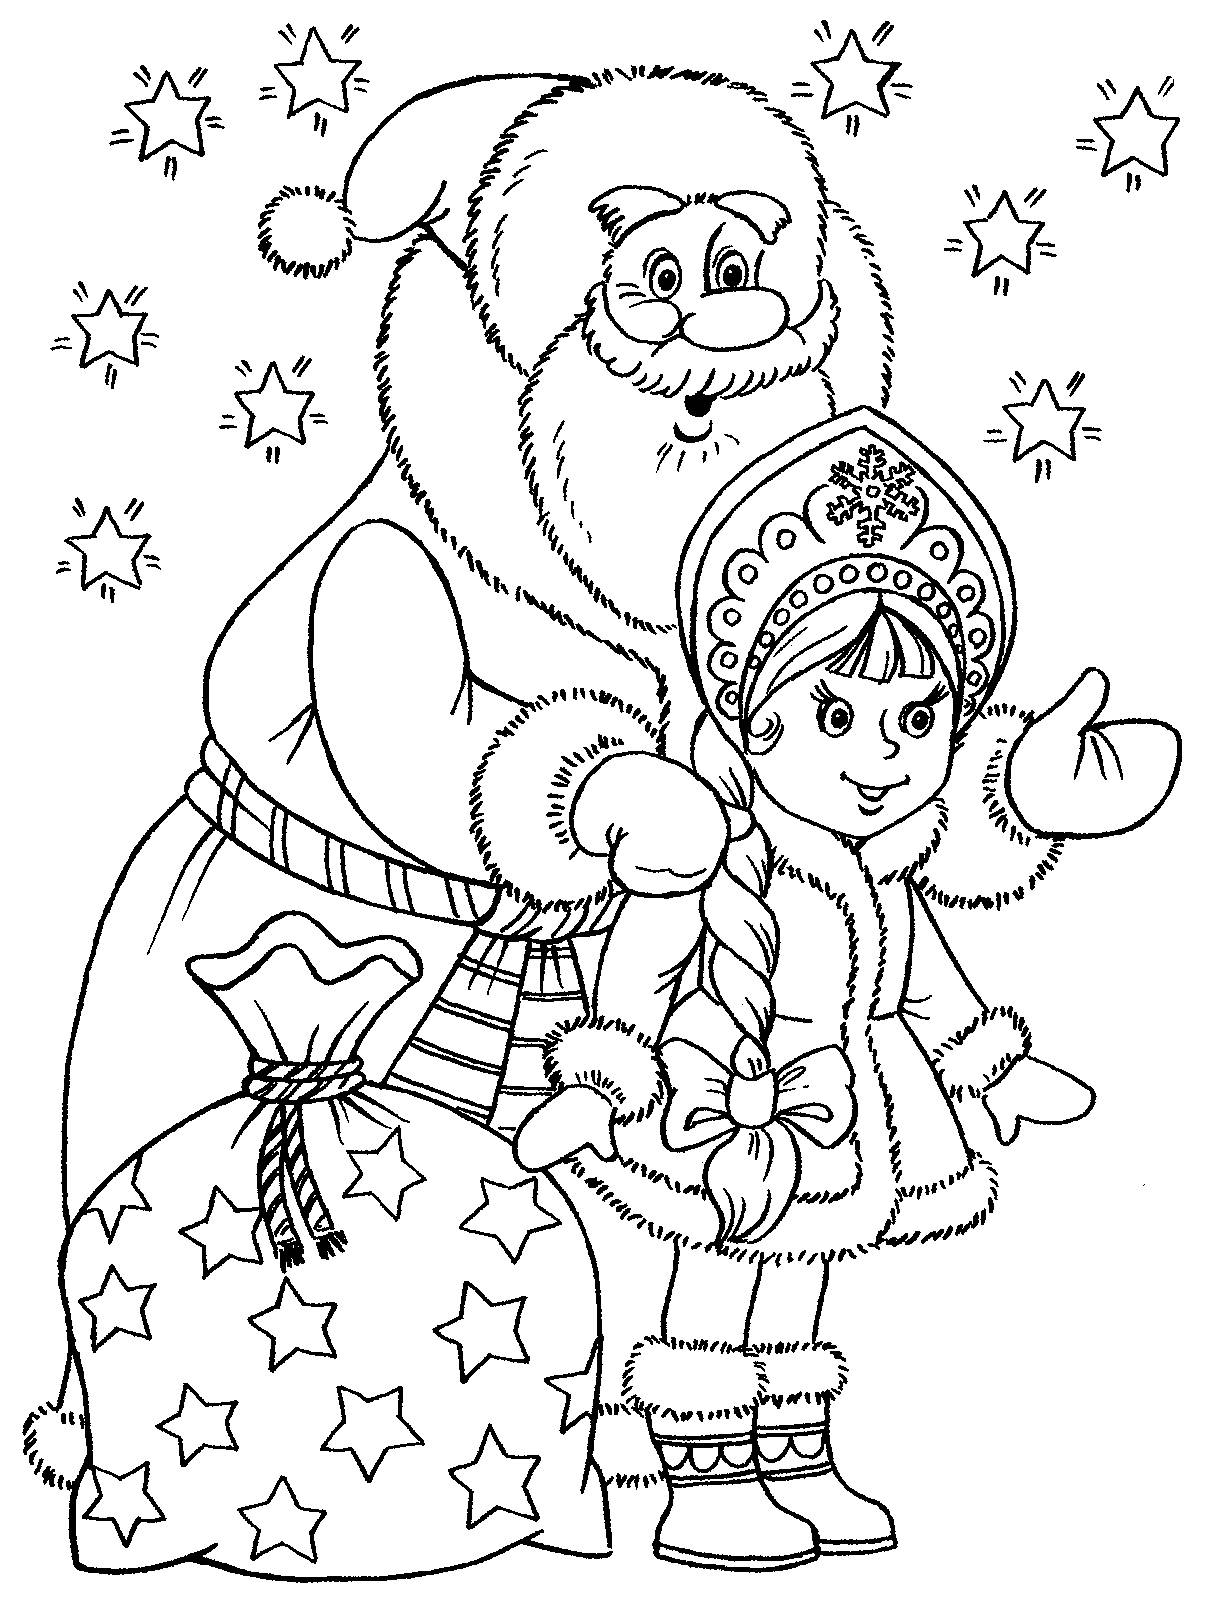 Santa Claus and Snow Maiden with gifts